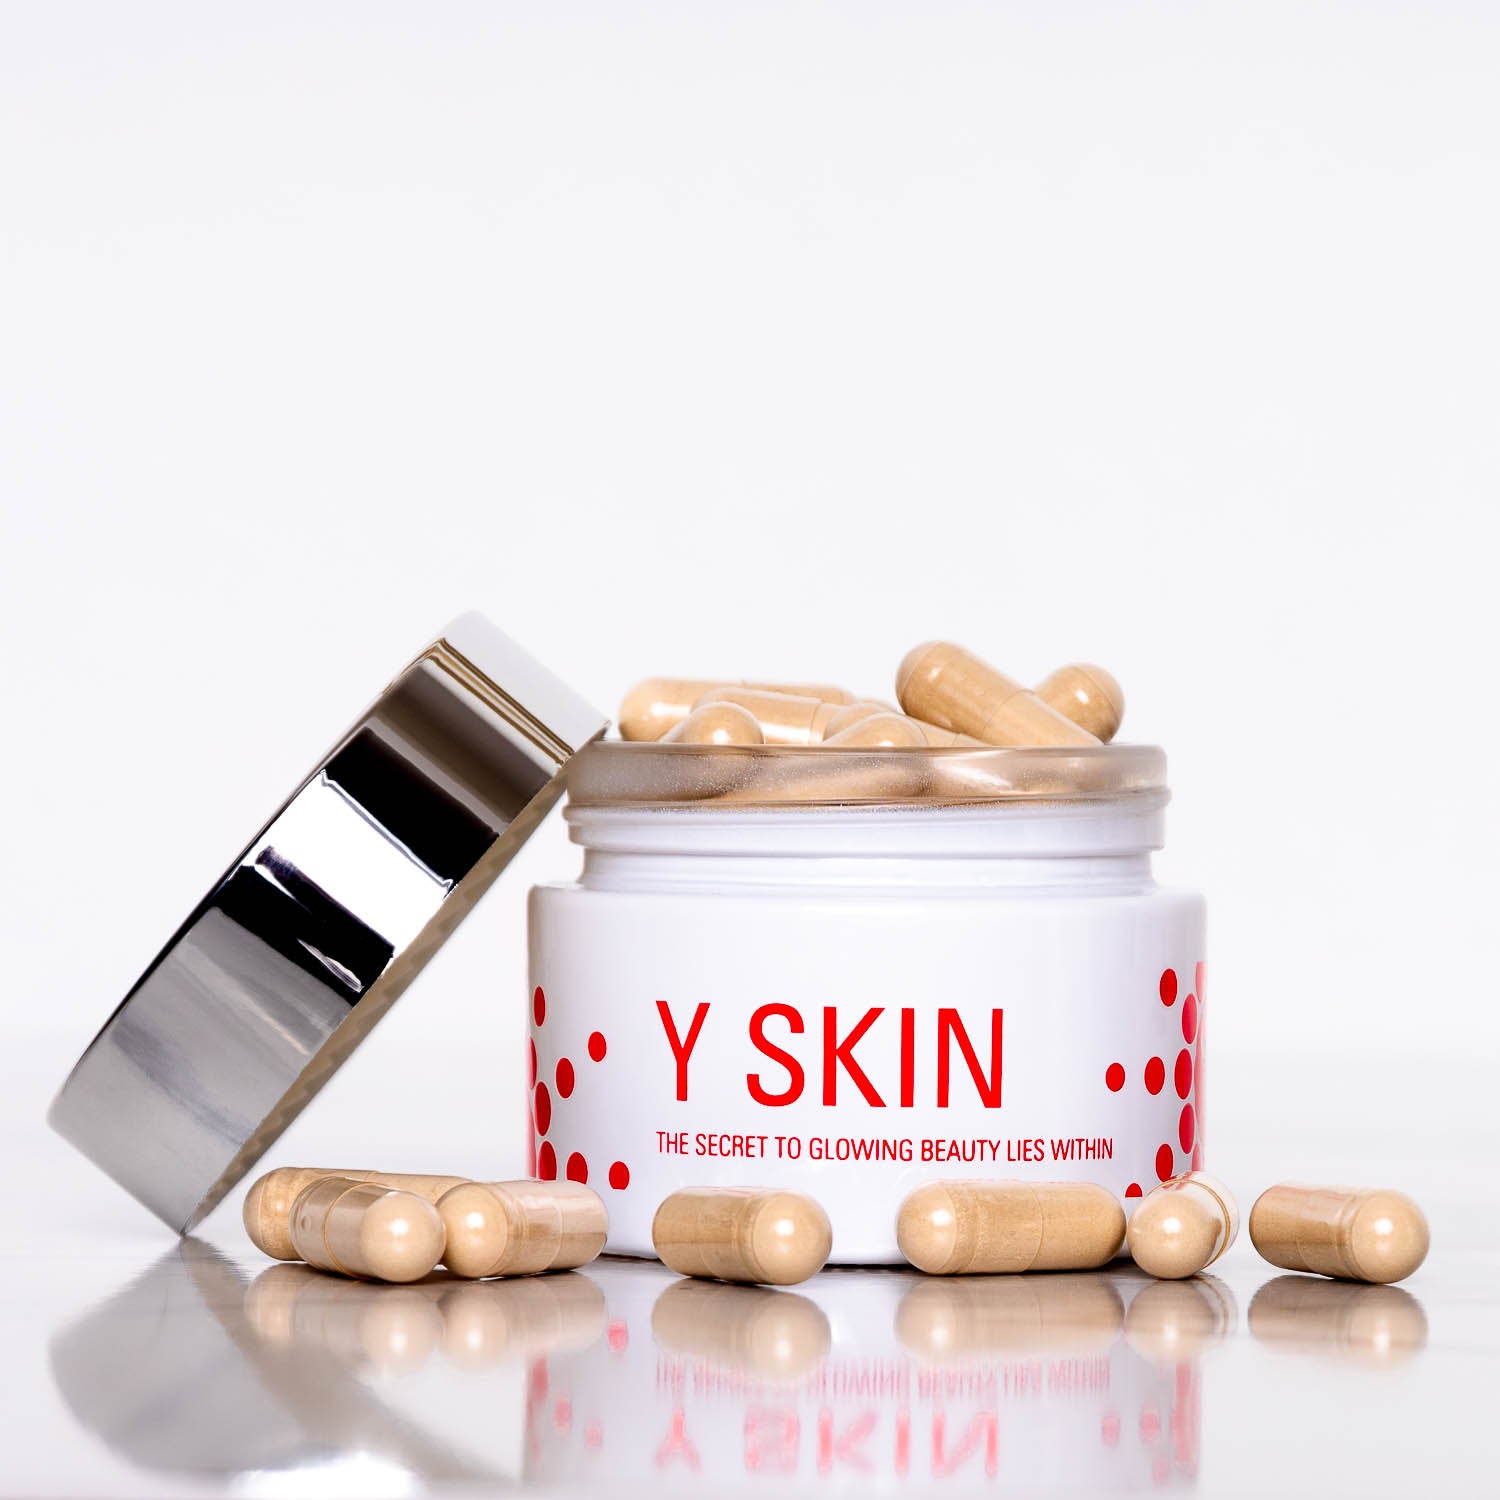 Y SKIN - supplement for ageing skin